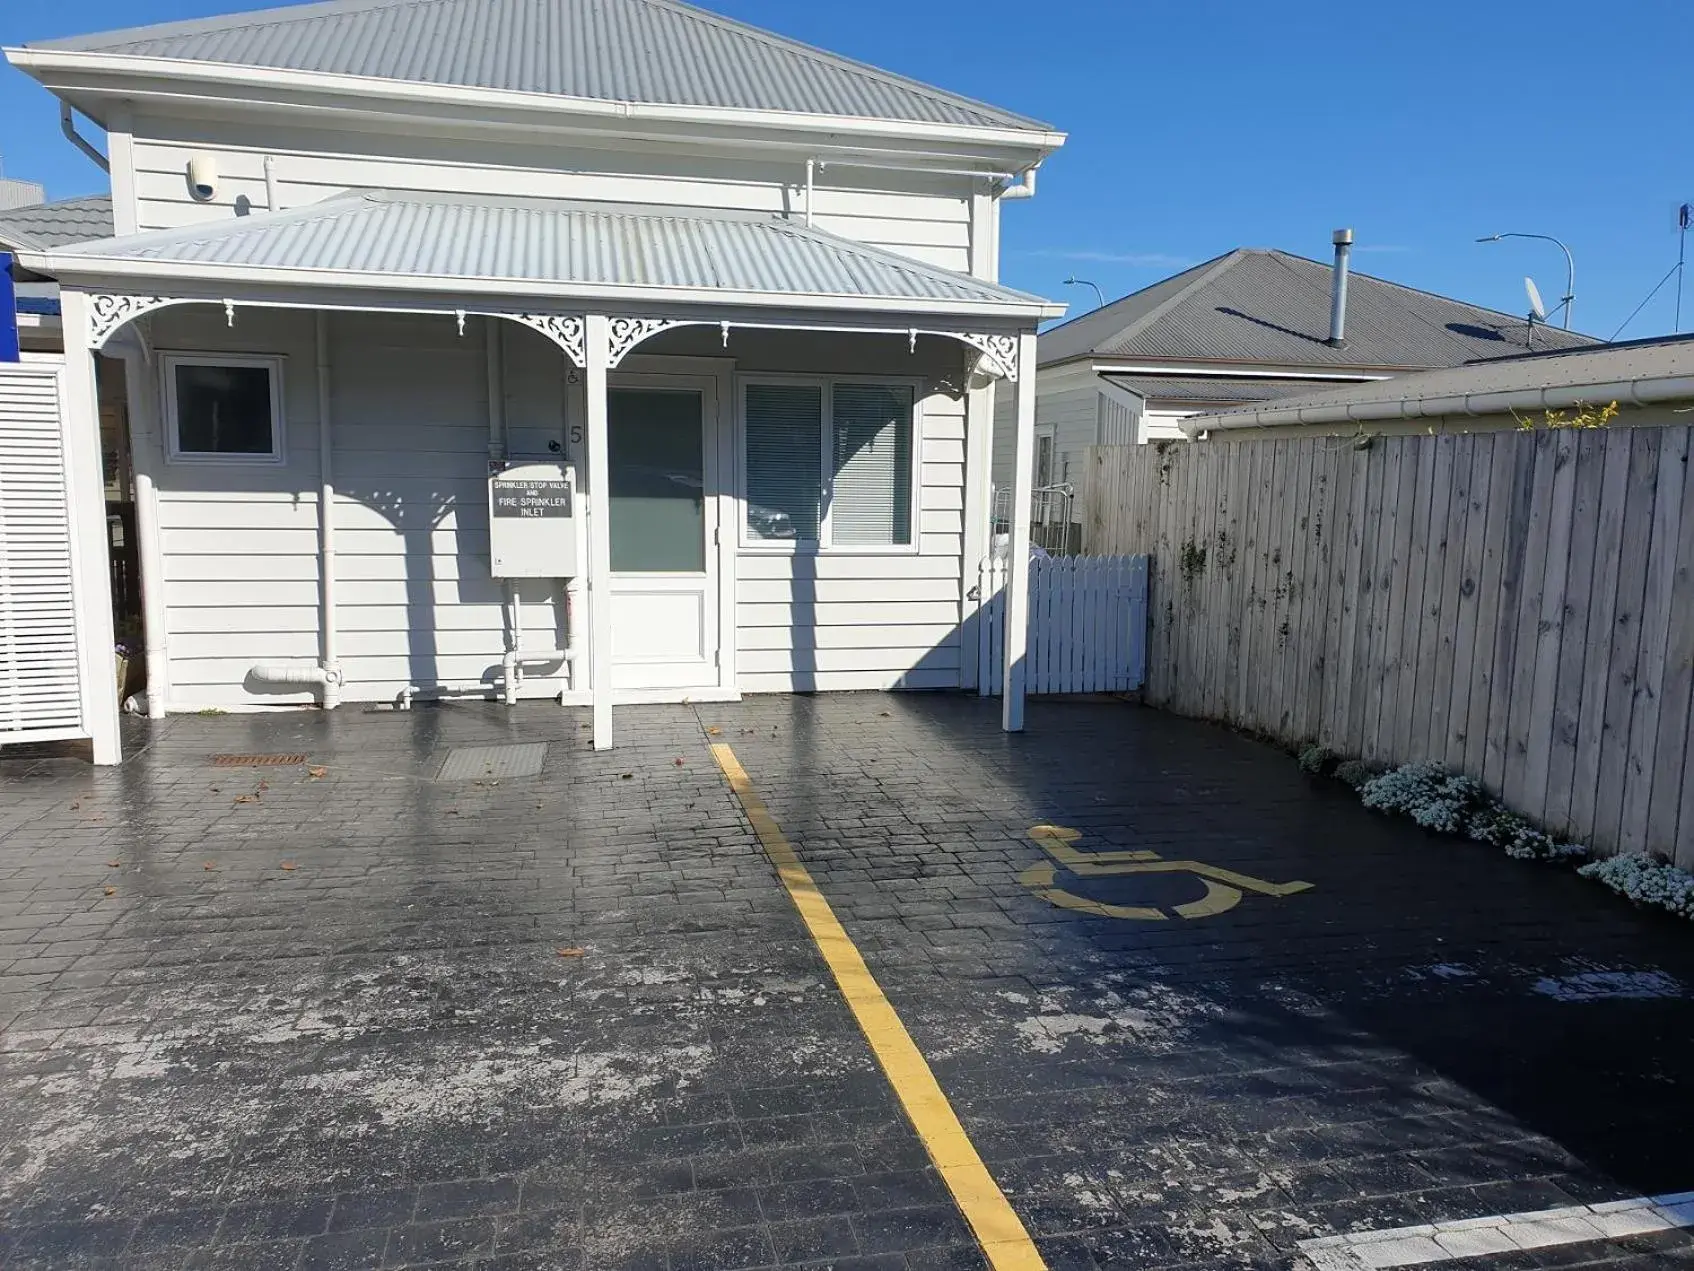 Facility for disabled guests in At Eden Park Motel